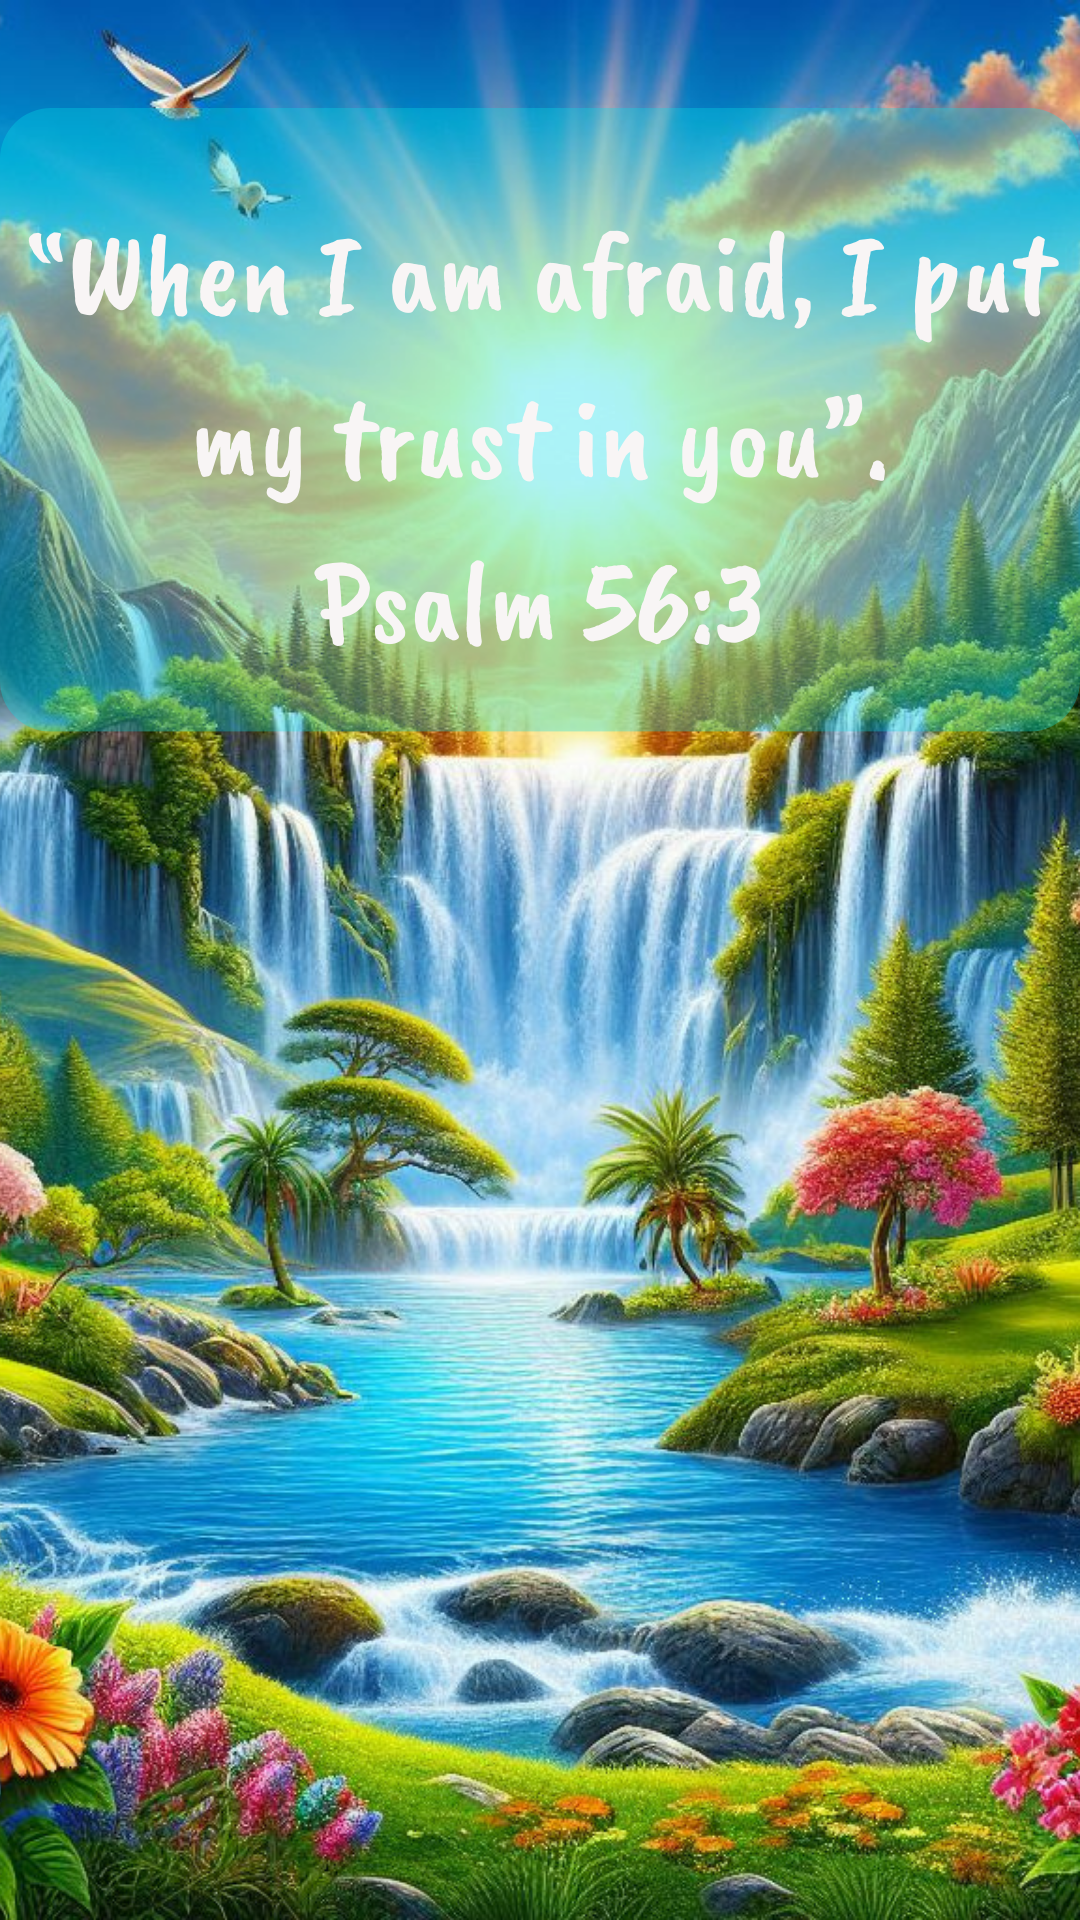 FREE “I put my trust in you”. Psalm 56:3 - Cell Phone & Desktop Screensavers - Digital Download only